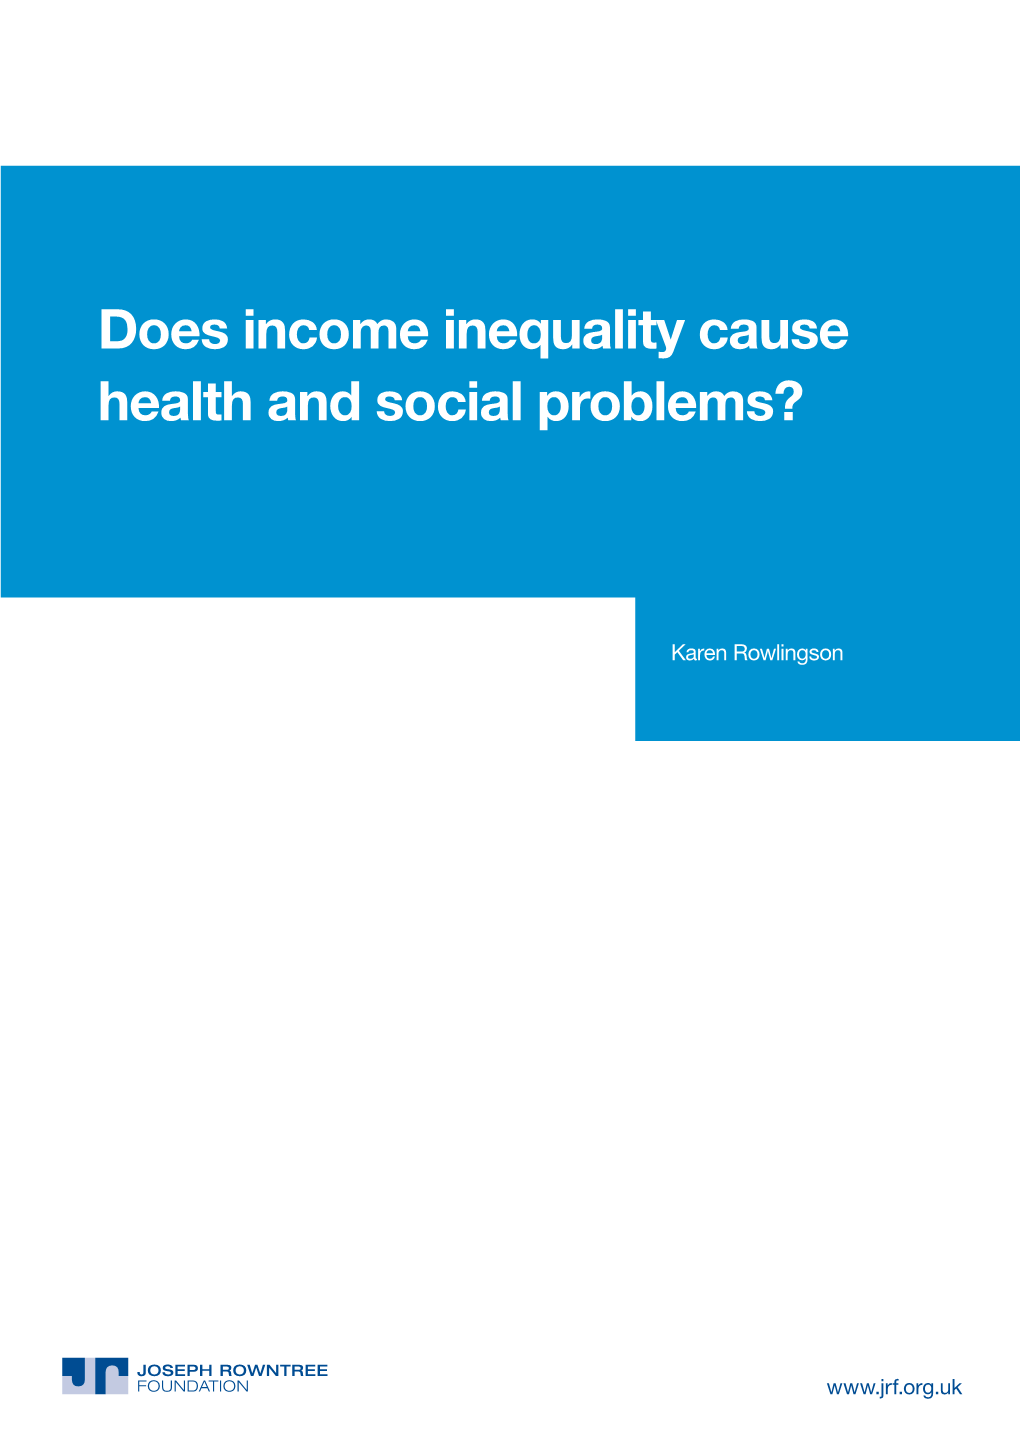 Does Income Inequality Cause Health and Social Problems?